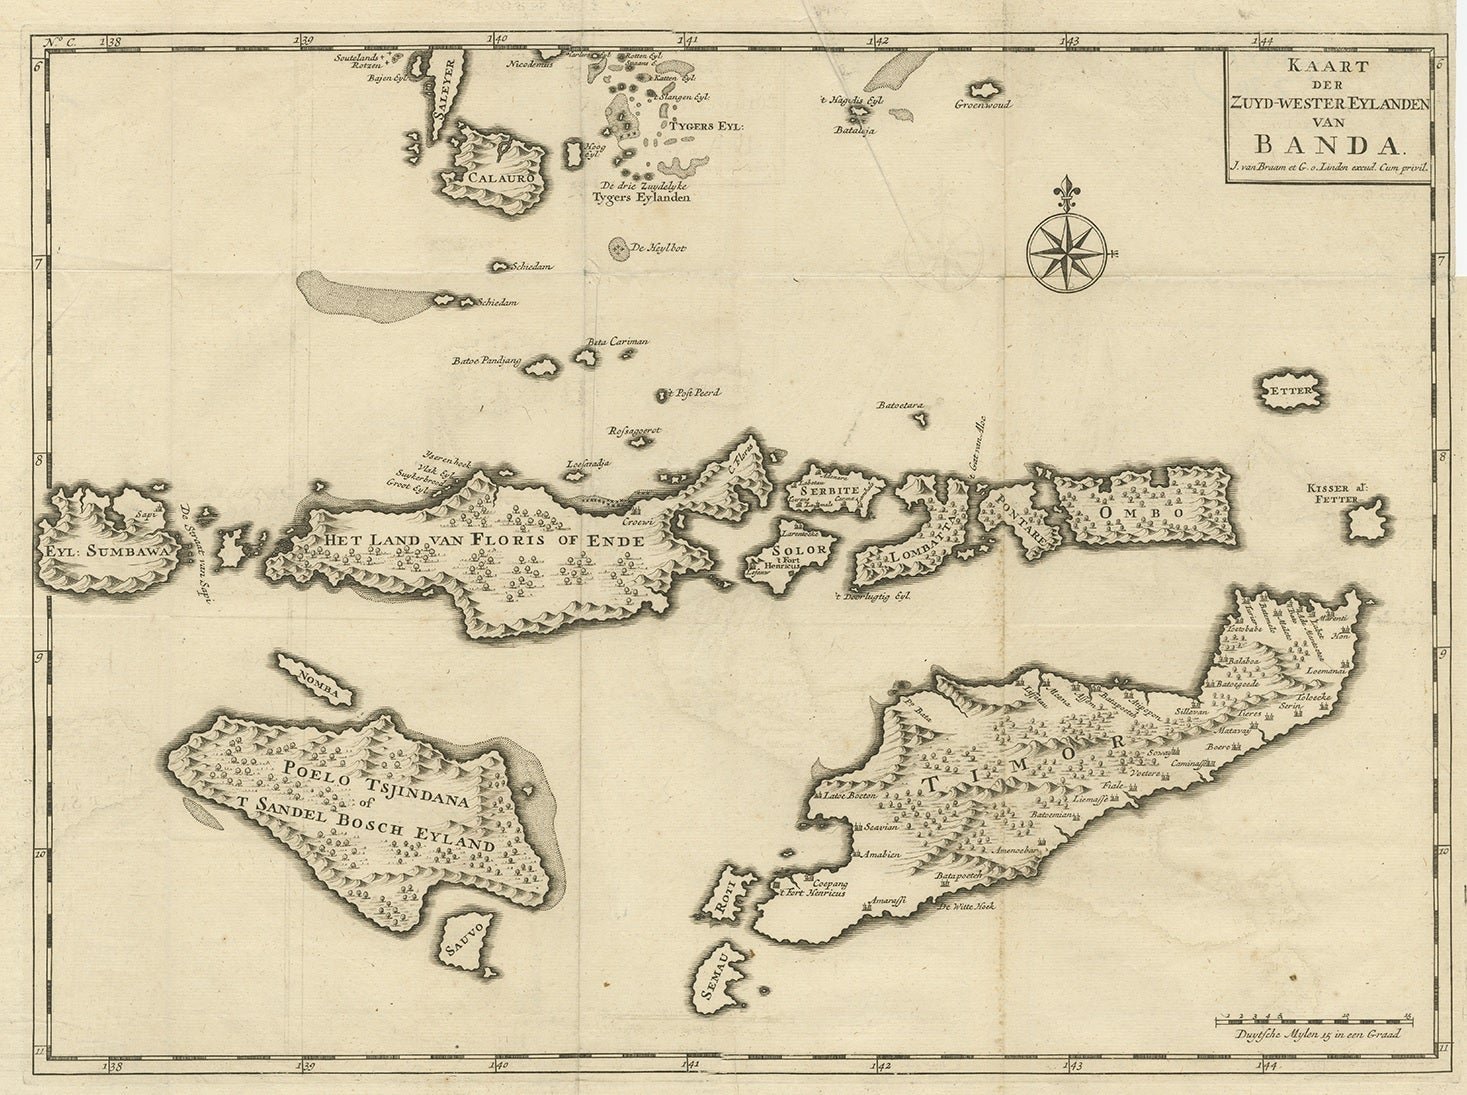 Antique Map of the Banda Islands in Indonesia by Valentijn, 1726